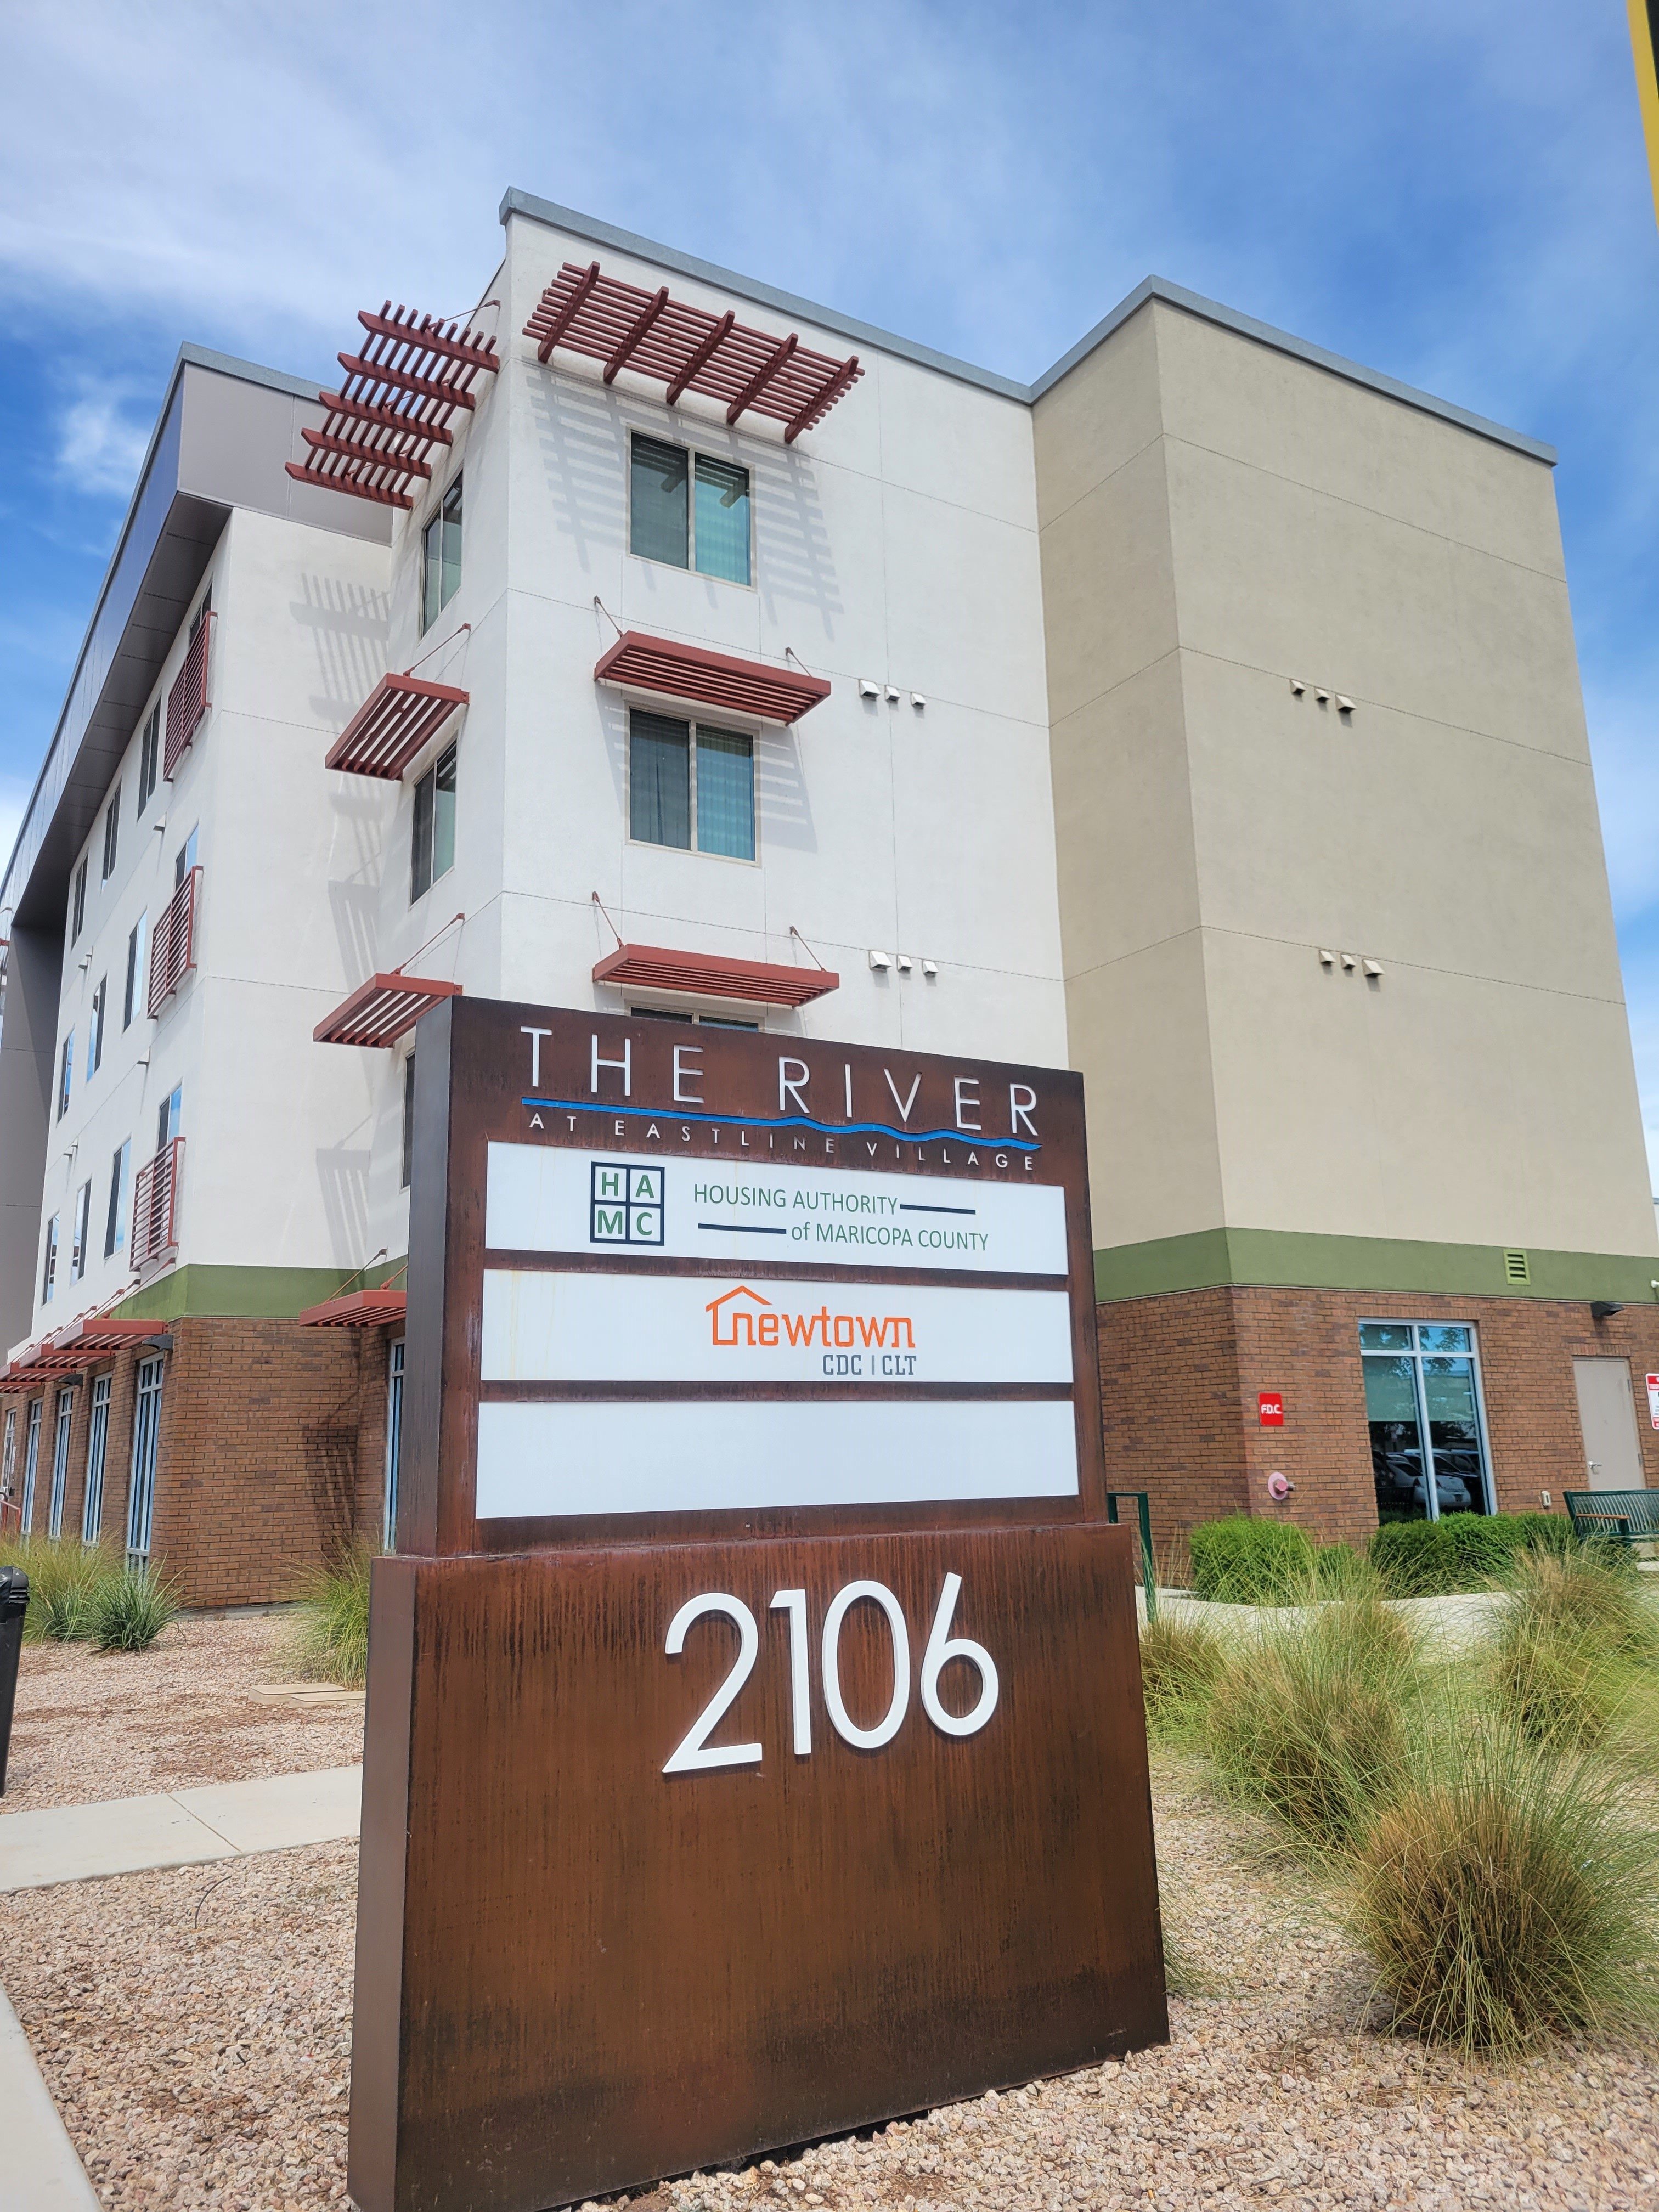 the river apartments sign in front of the building